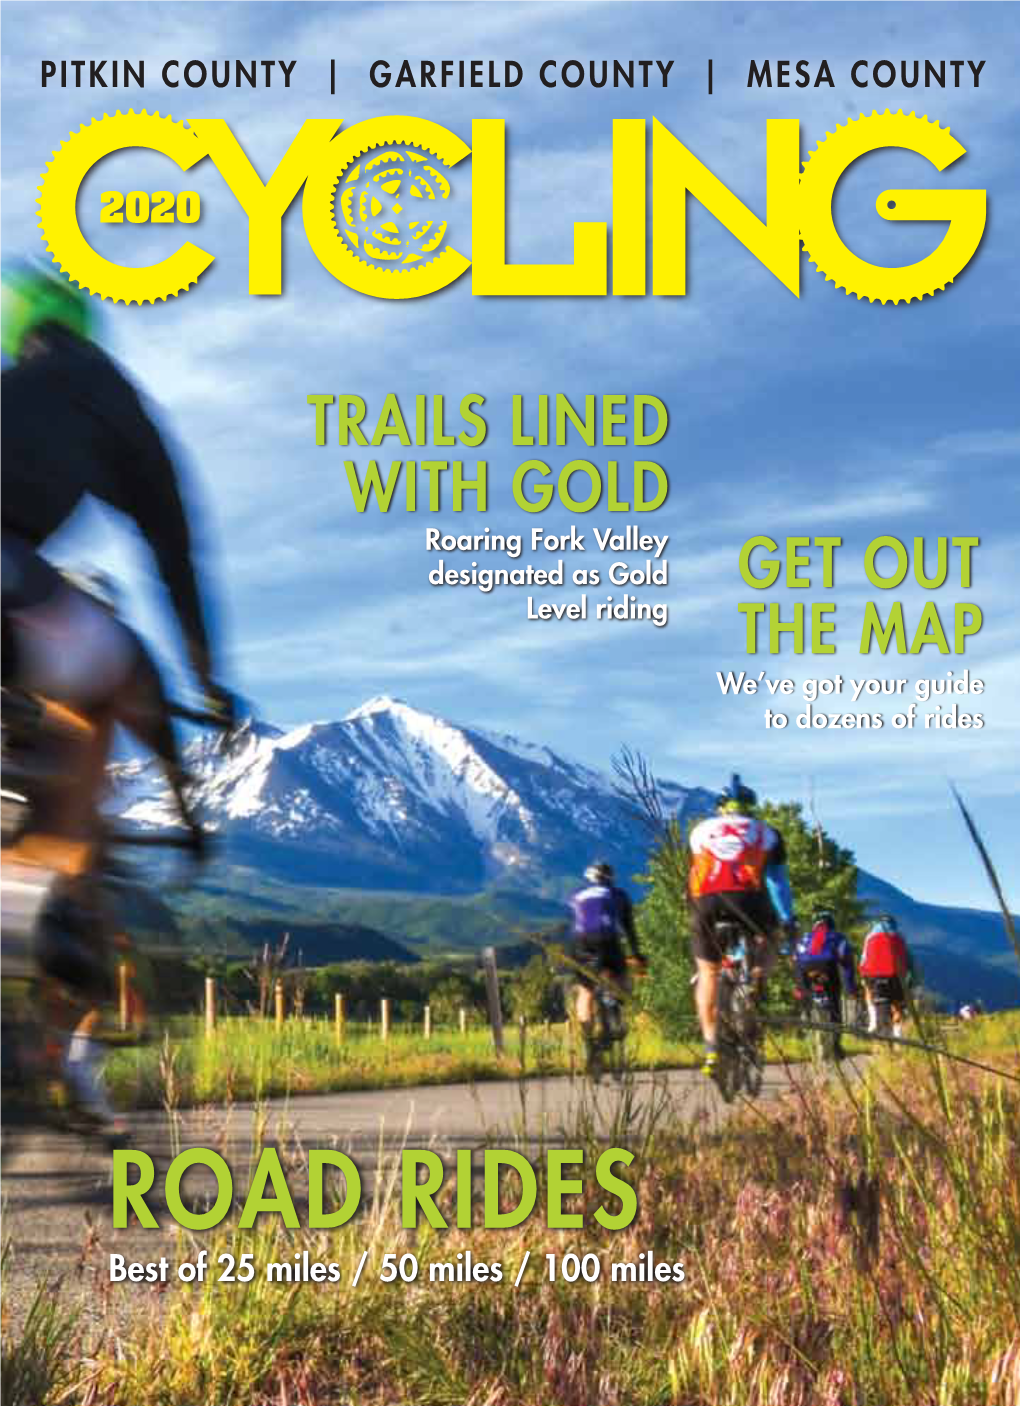 Trails Lined with Gold Roaring Fork Valley Designated As Gold Get out Level Riding the Map We’Ve Got Your Guide to Dozens of Rides